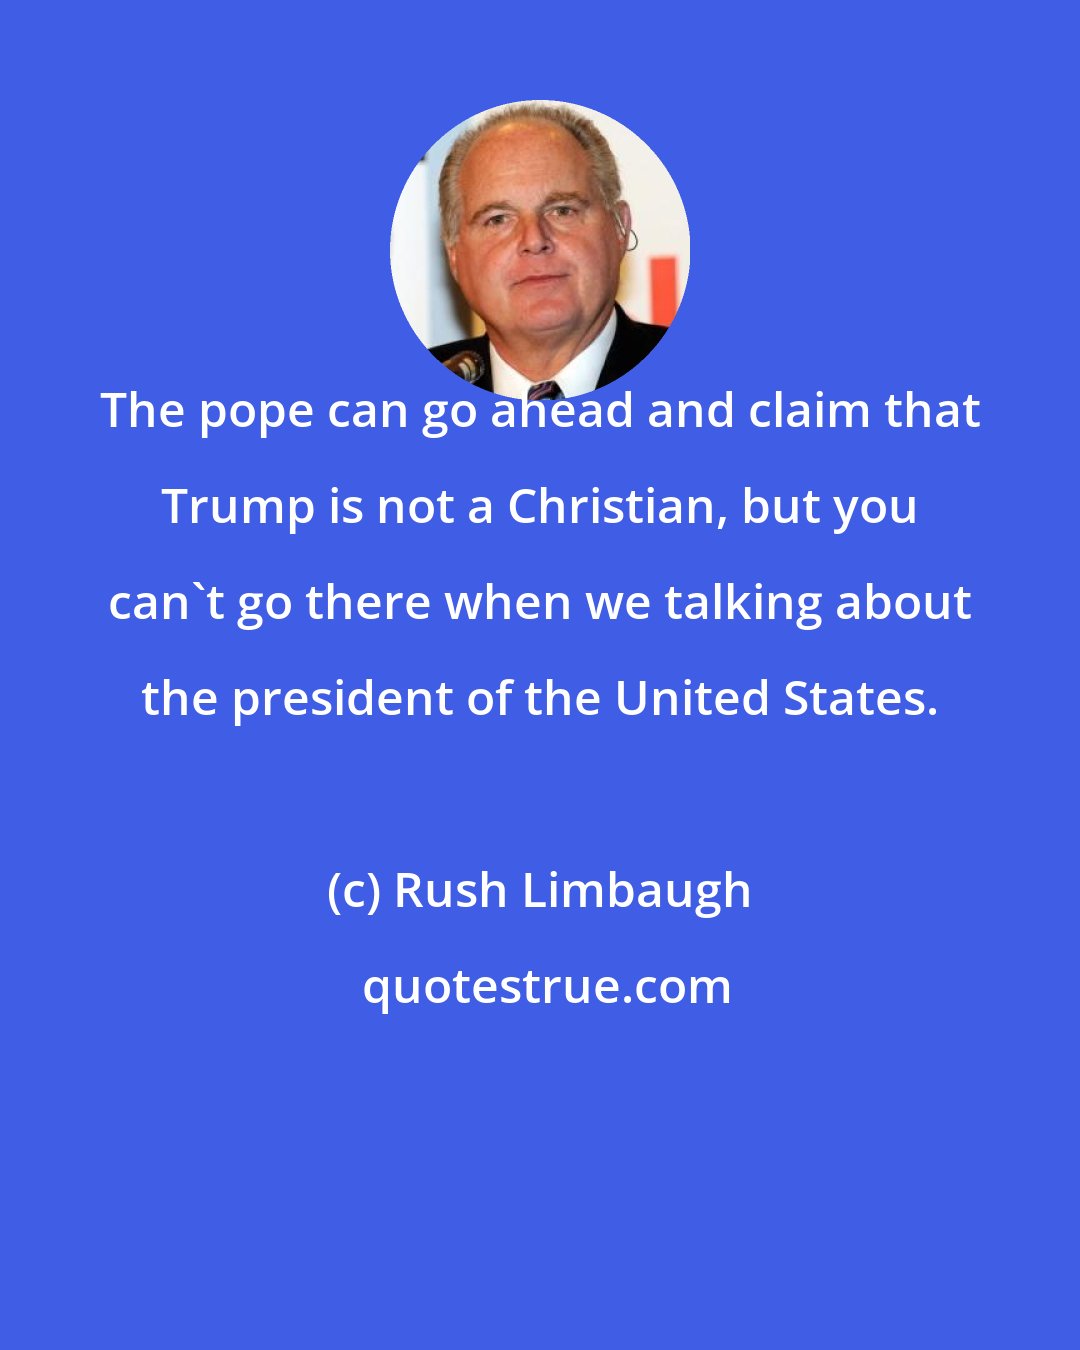 Rush Limbaugh: The pope can go ahead and claim that Trump is not a Christian, but you can't go there when we talking about the president of the United States.